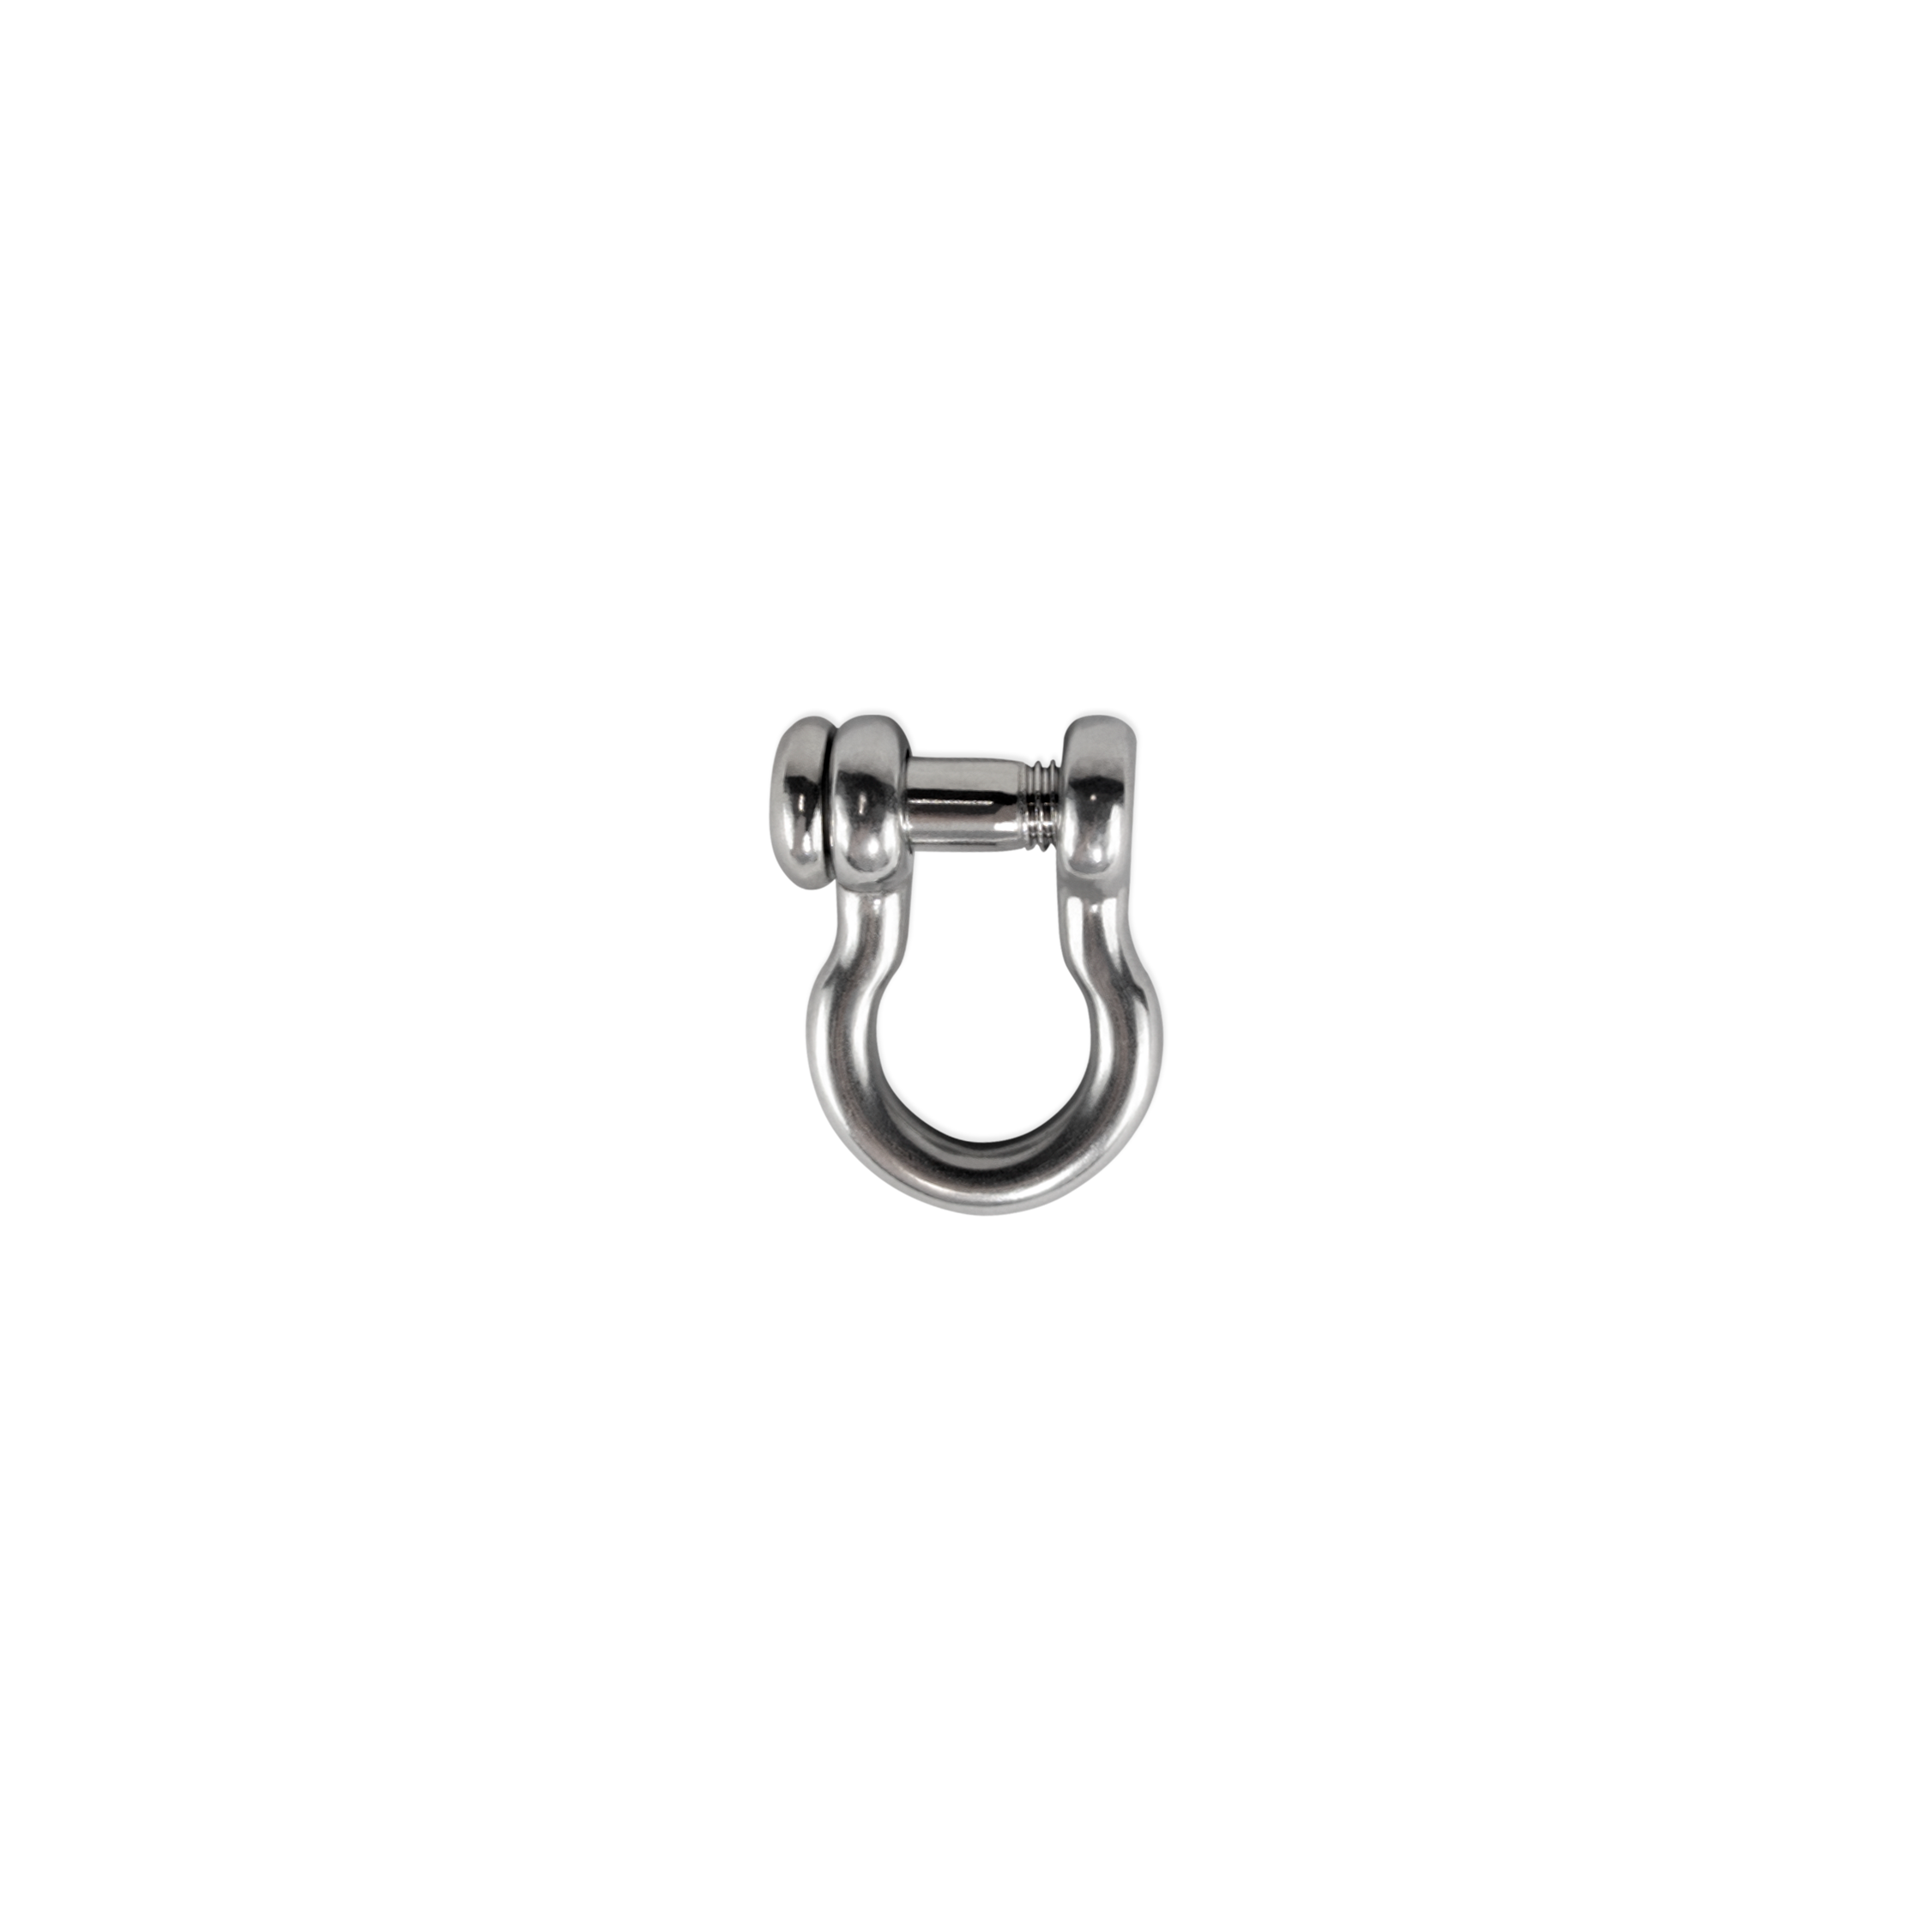 H171 - Clevis Shackle Stainless Steel w/ Anti-Theft Bolt